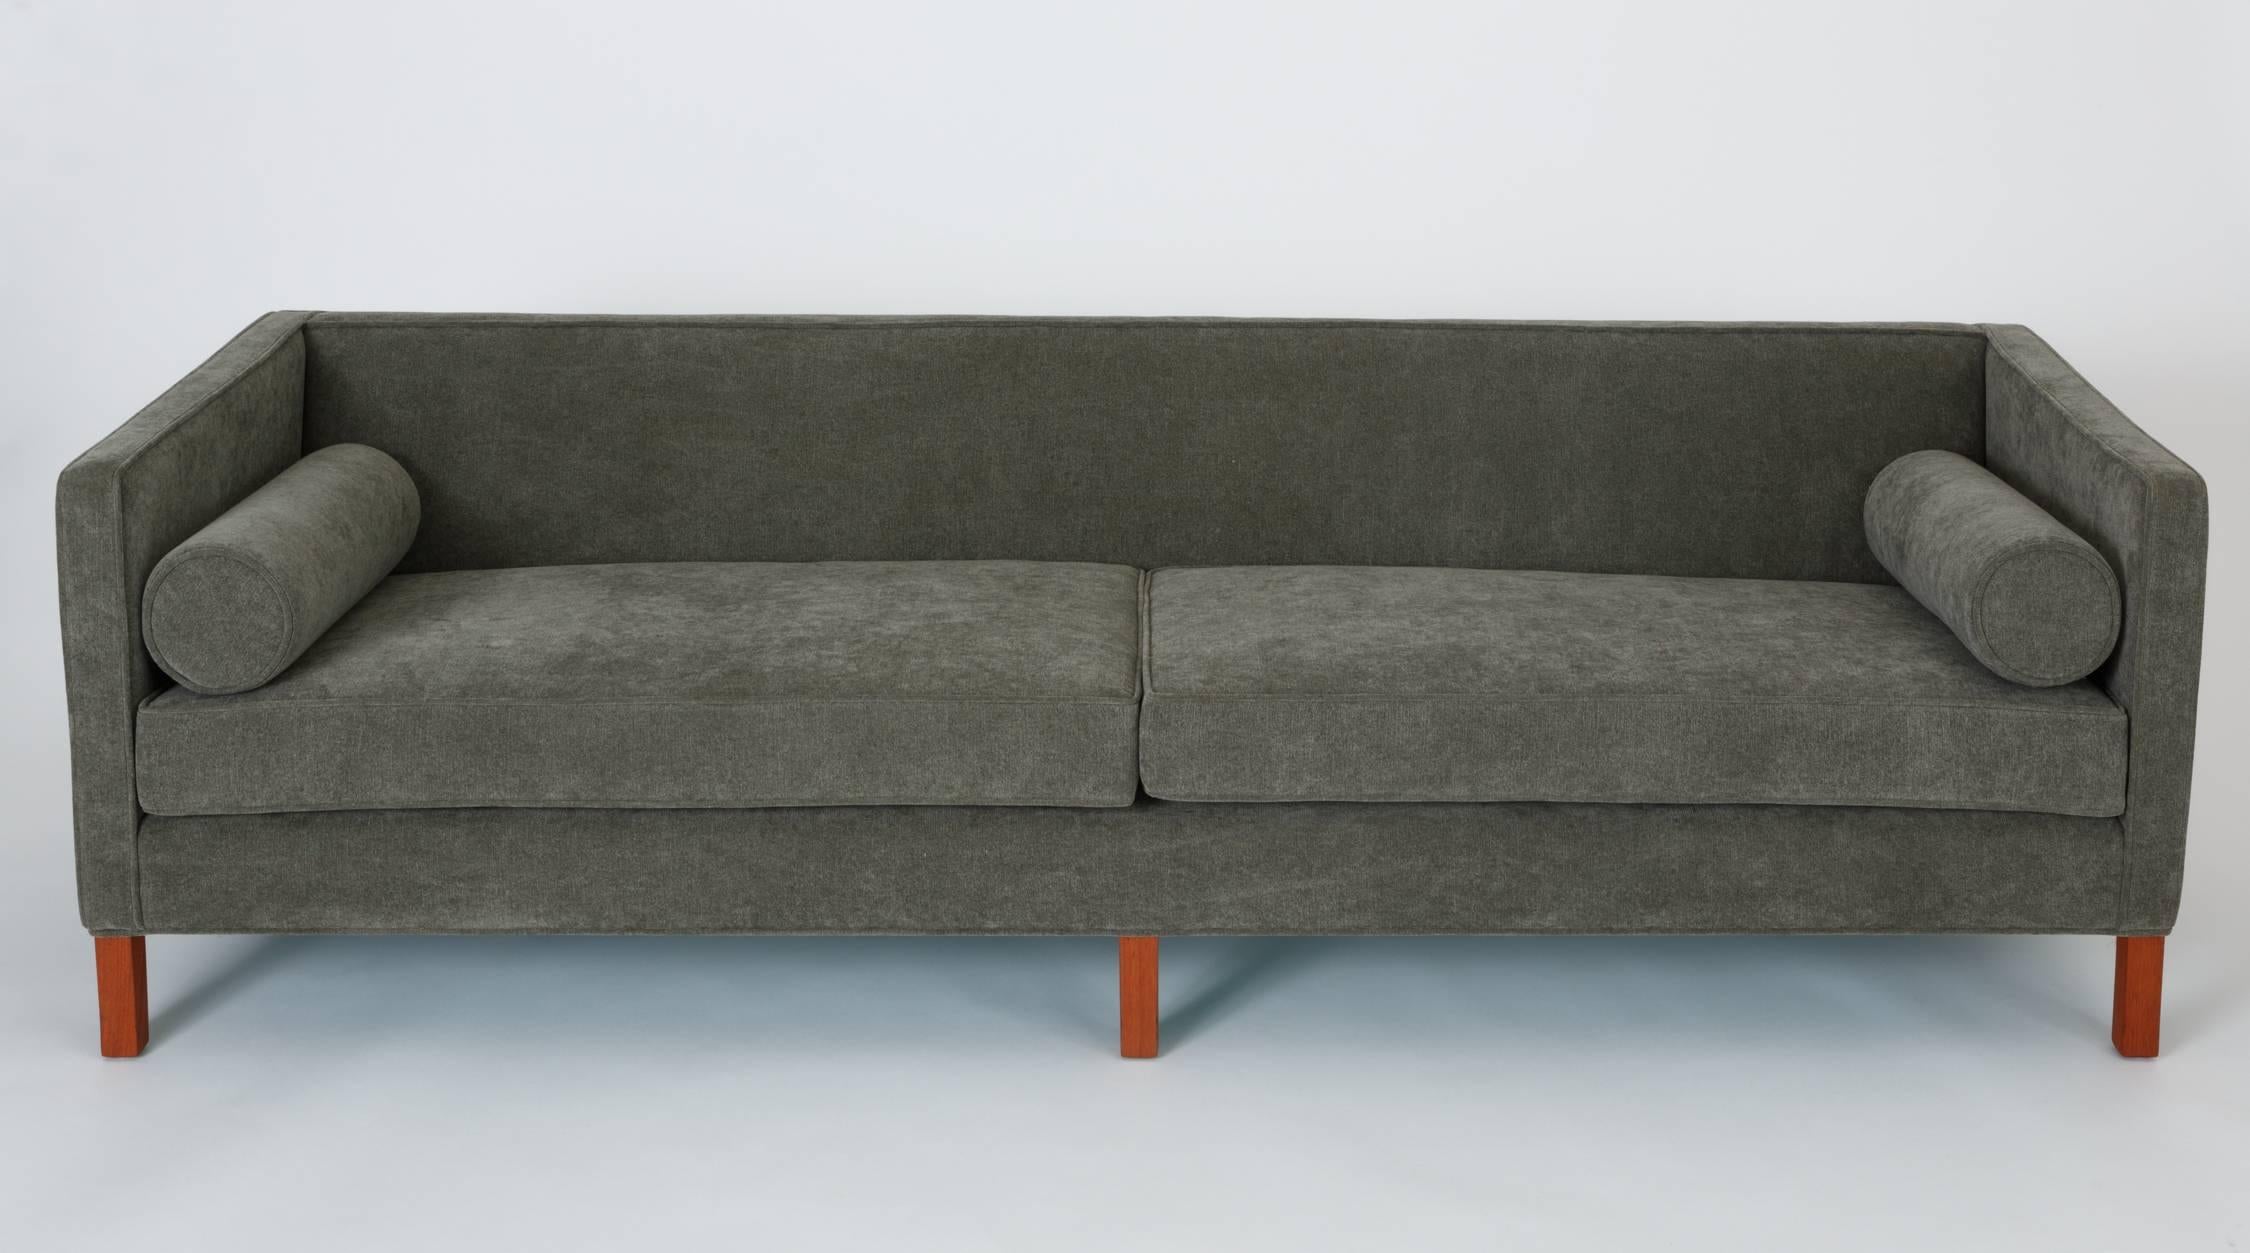 A straightforward modern design from Edward Wormley, this 1950s sofa has a three-sided, upholstered case with a back panel gently angled for comfort. The deep seat has two long cushions and a tight back, flanked on either side by round bolster